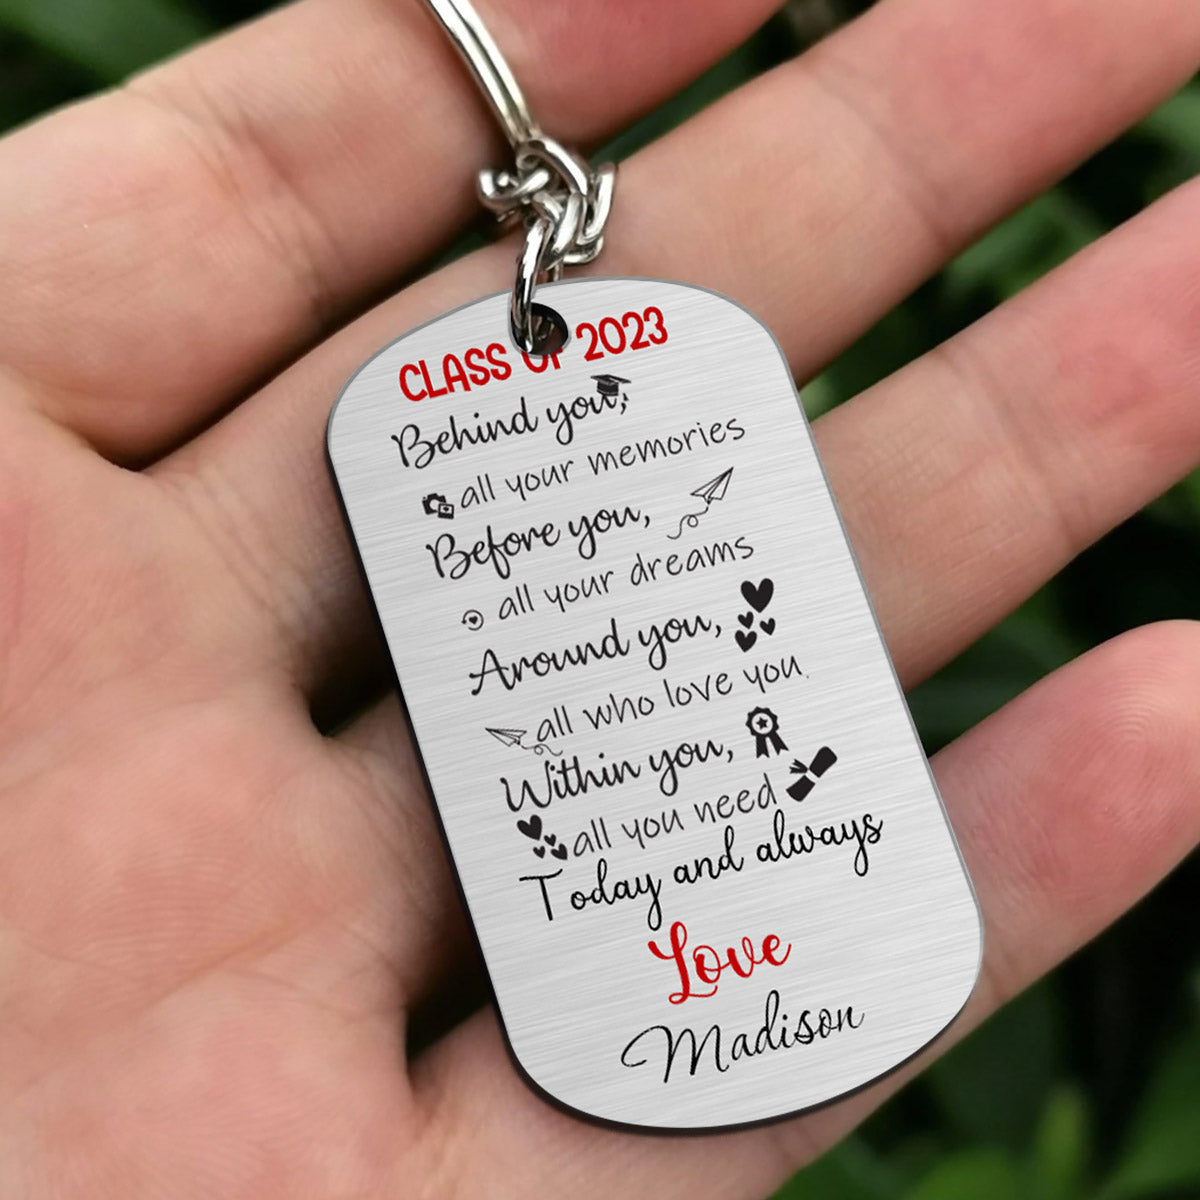 Class Of 2023 - Personalized Graduation Stainless Steel Keychain